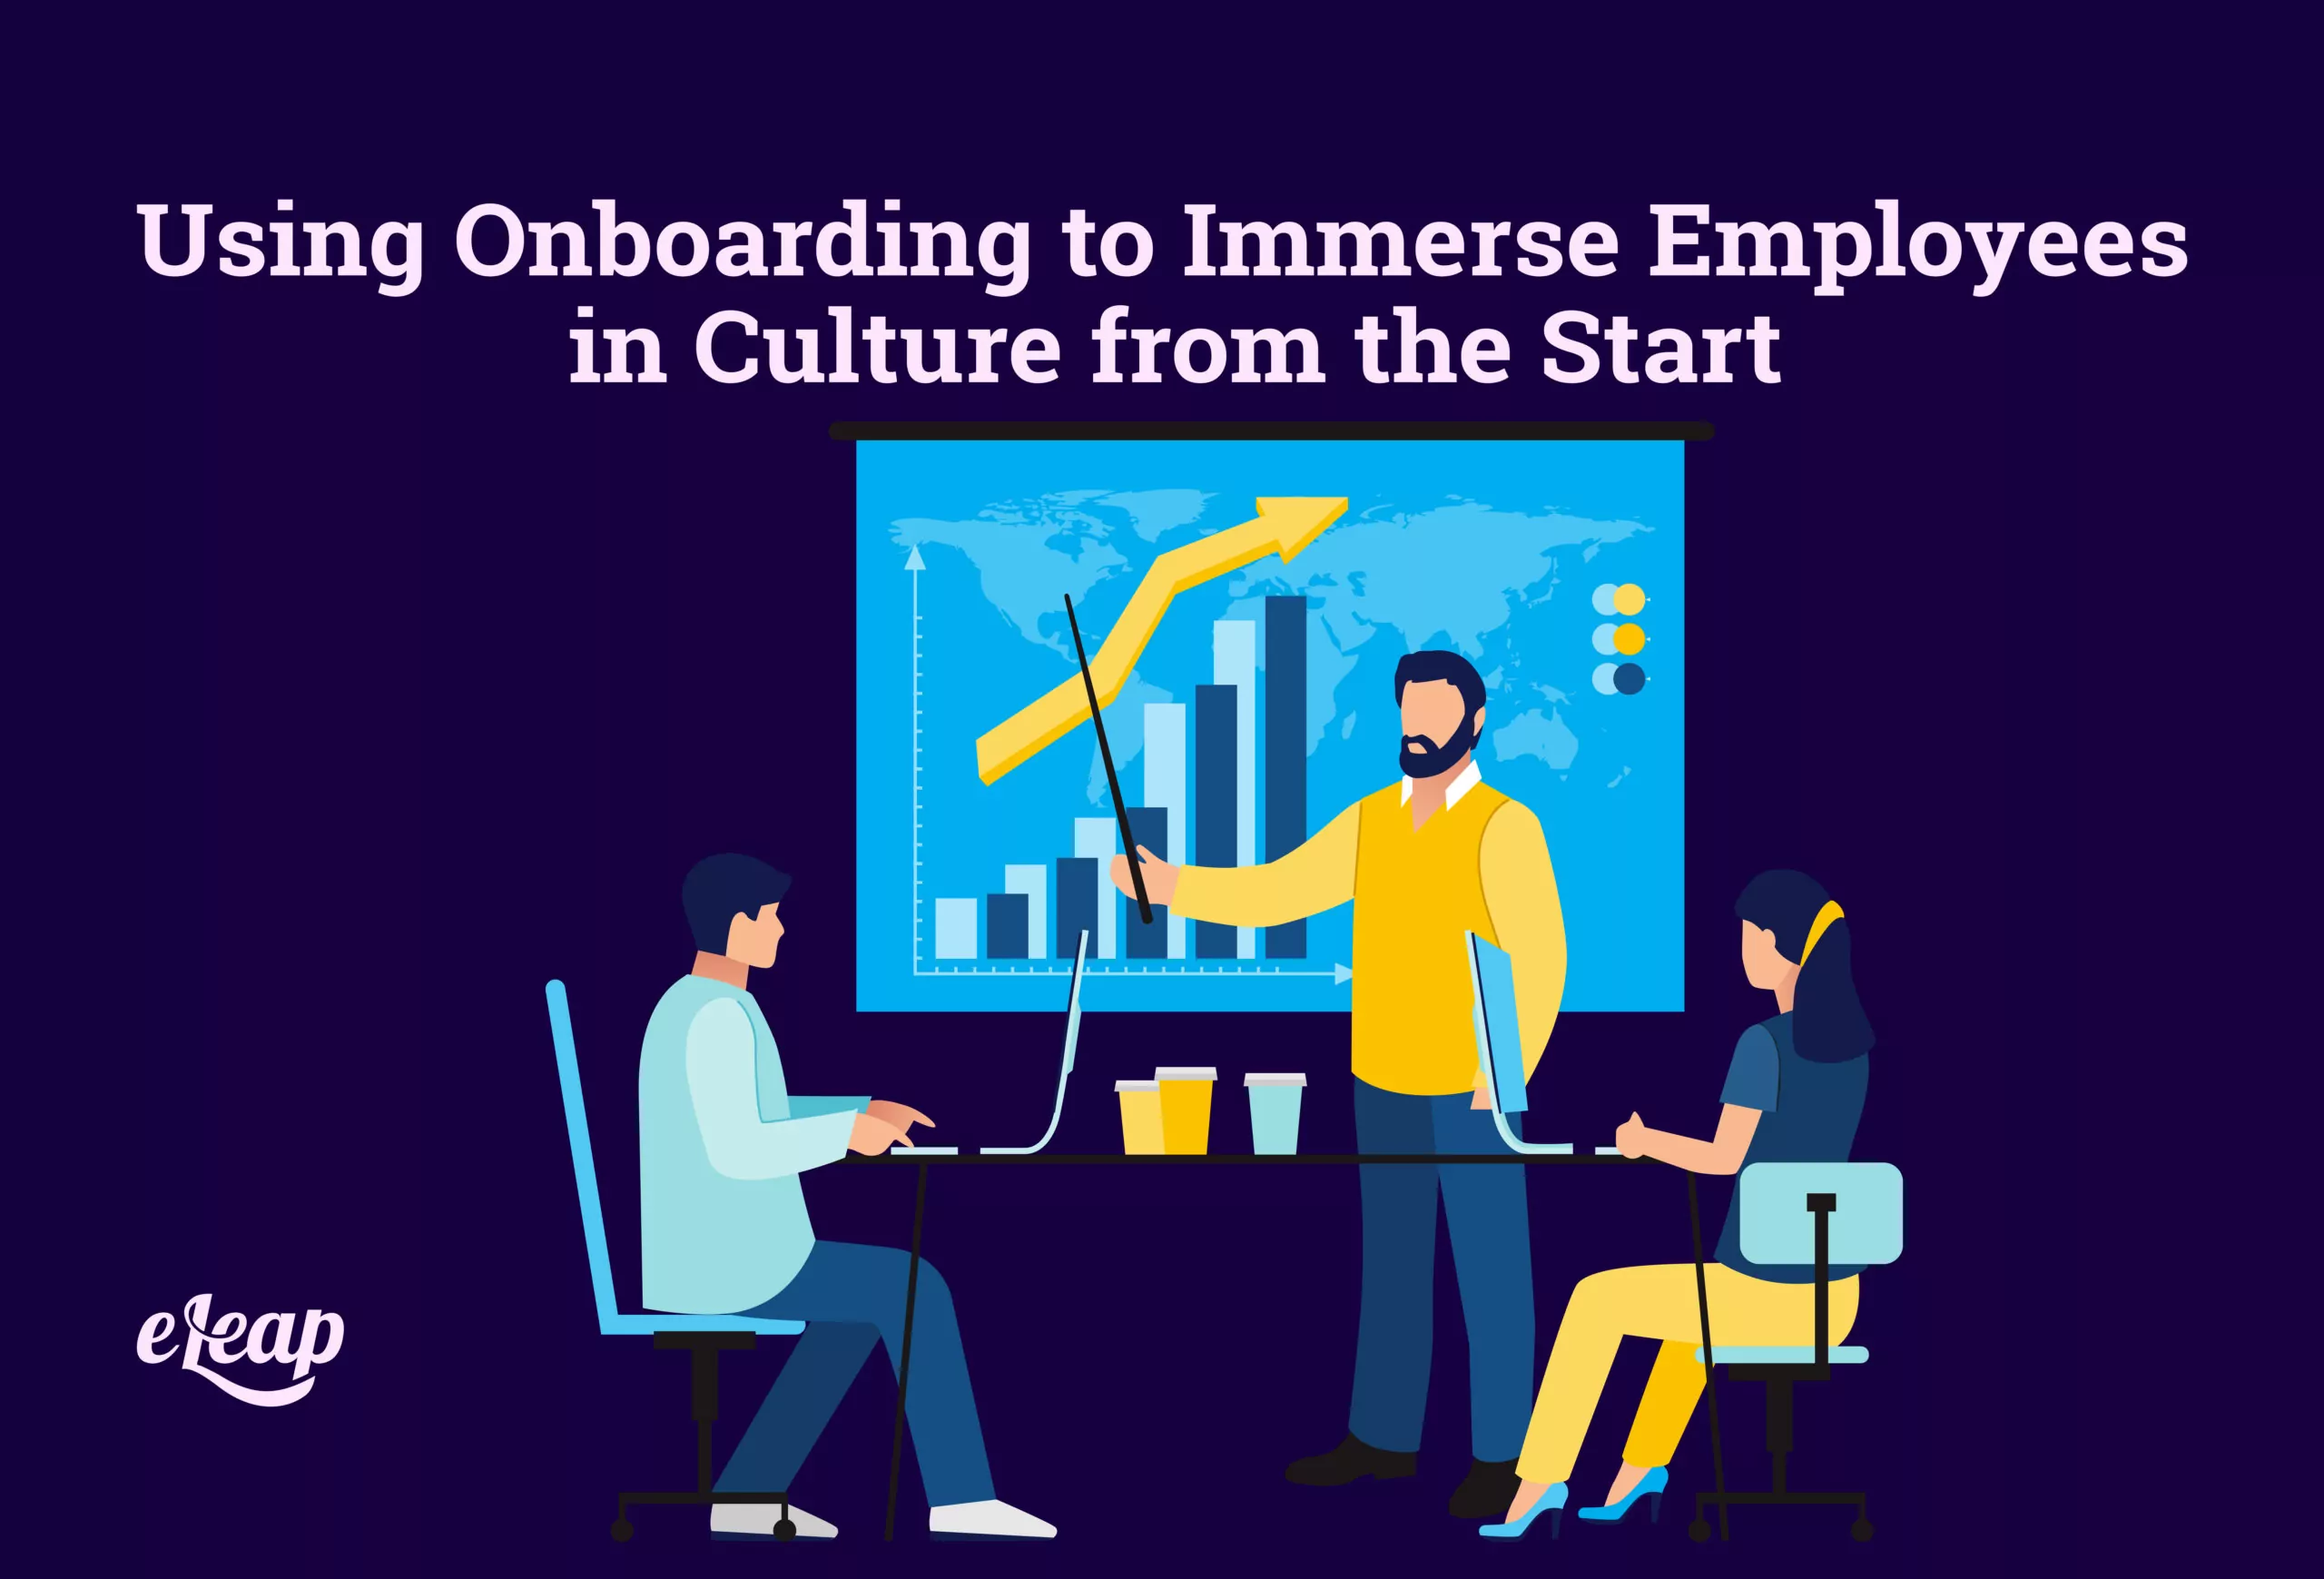 Using Onboarding to Immerse Employees in Culture from the Start